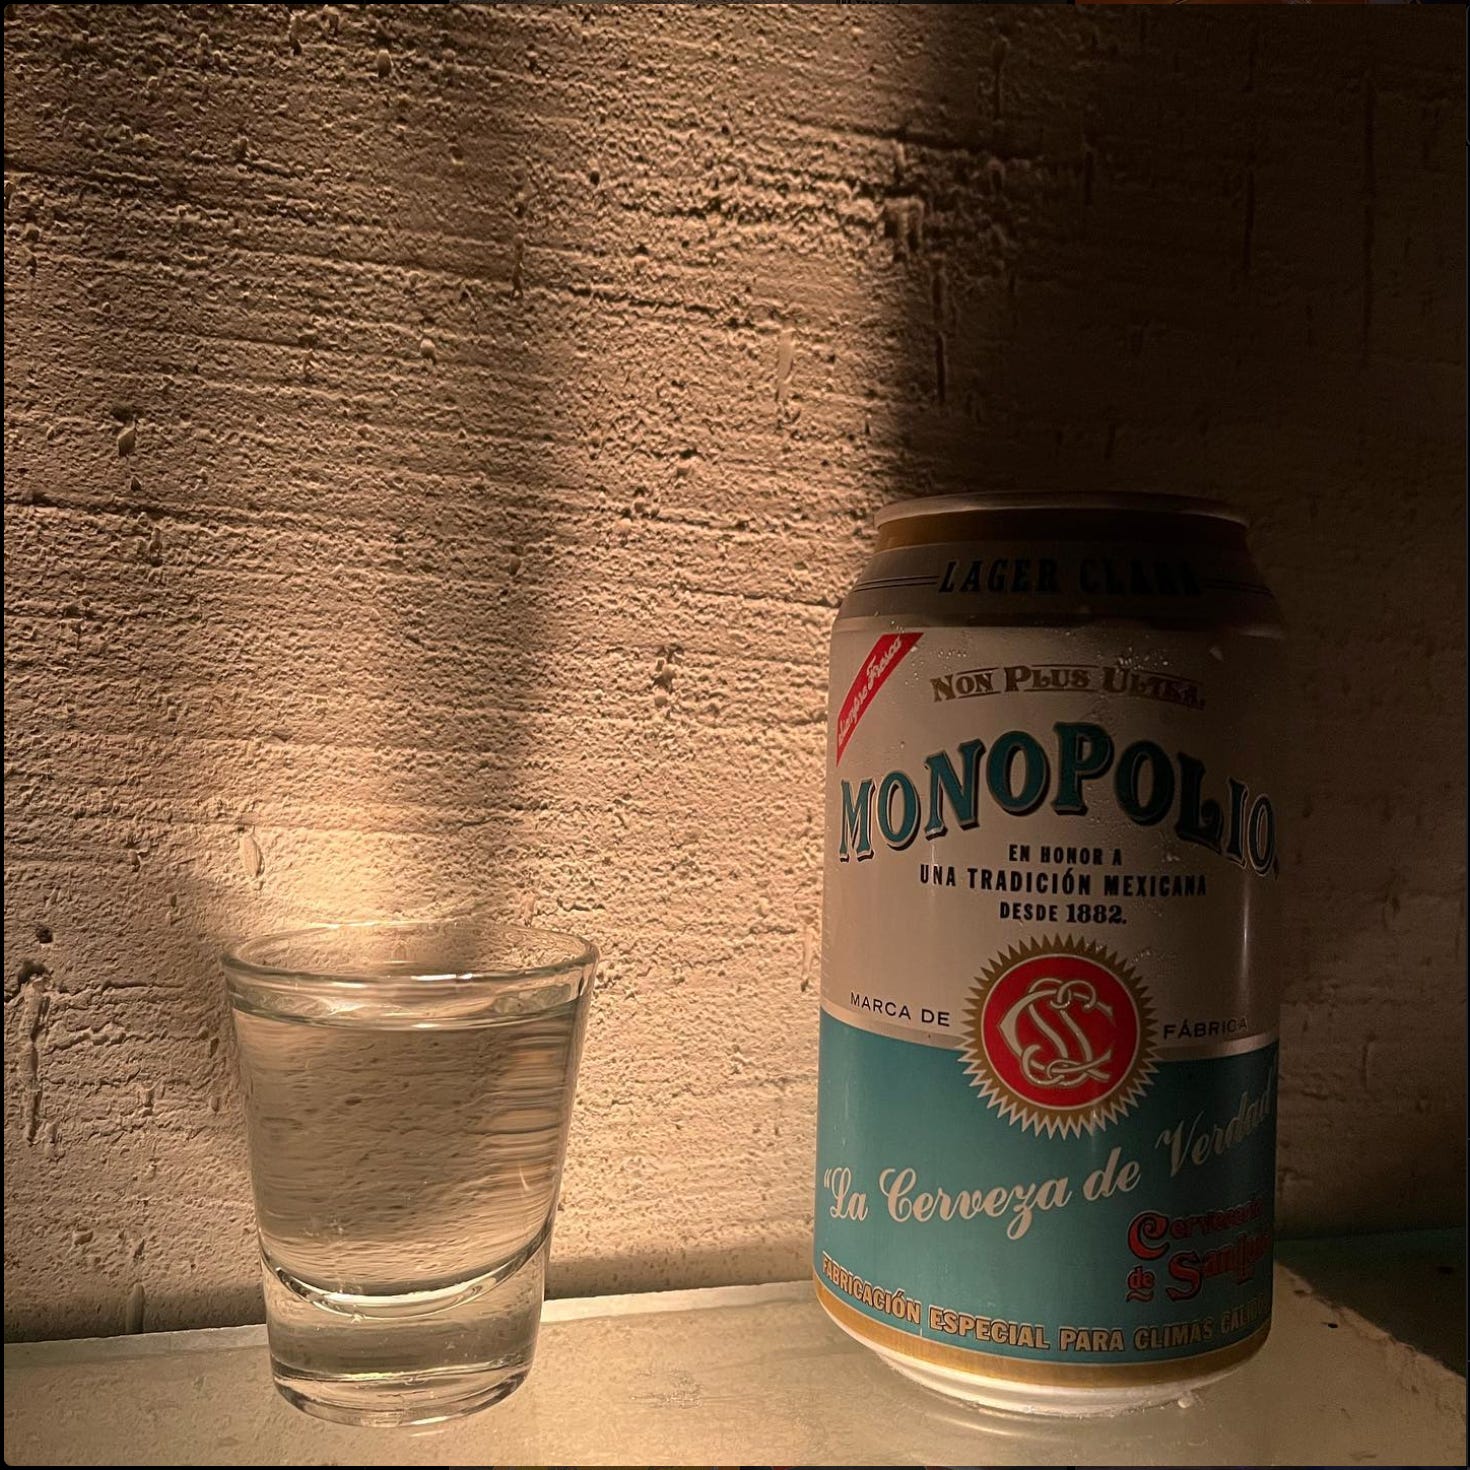 A shot of mezcal and a can of Monopolio.